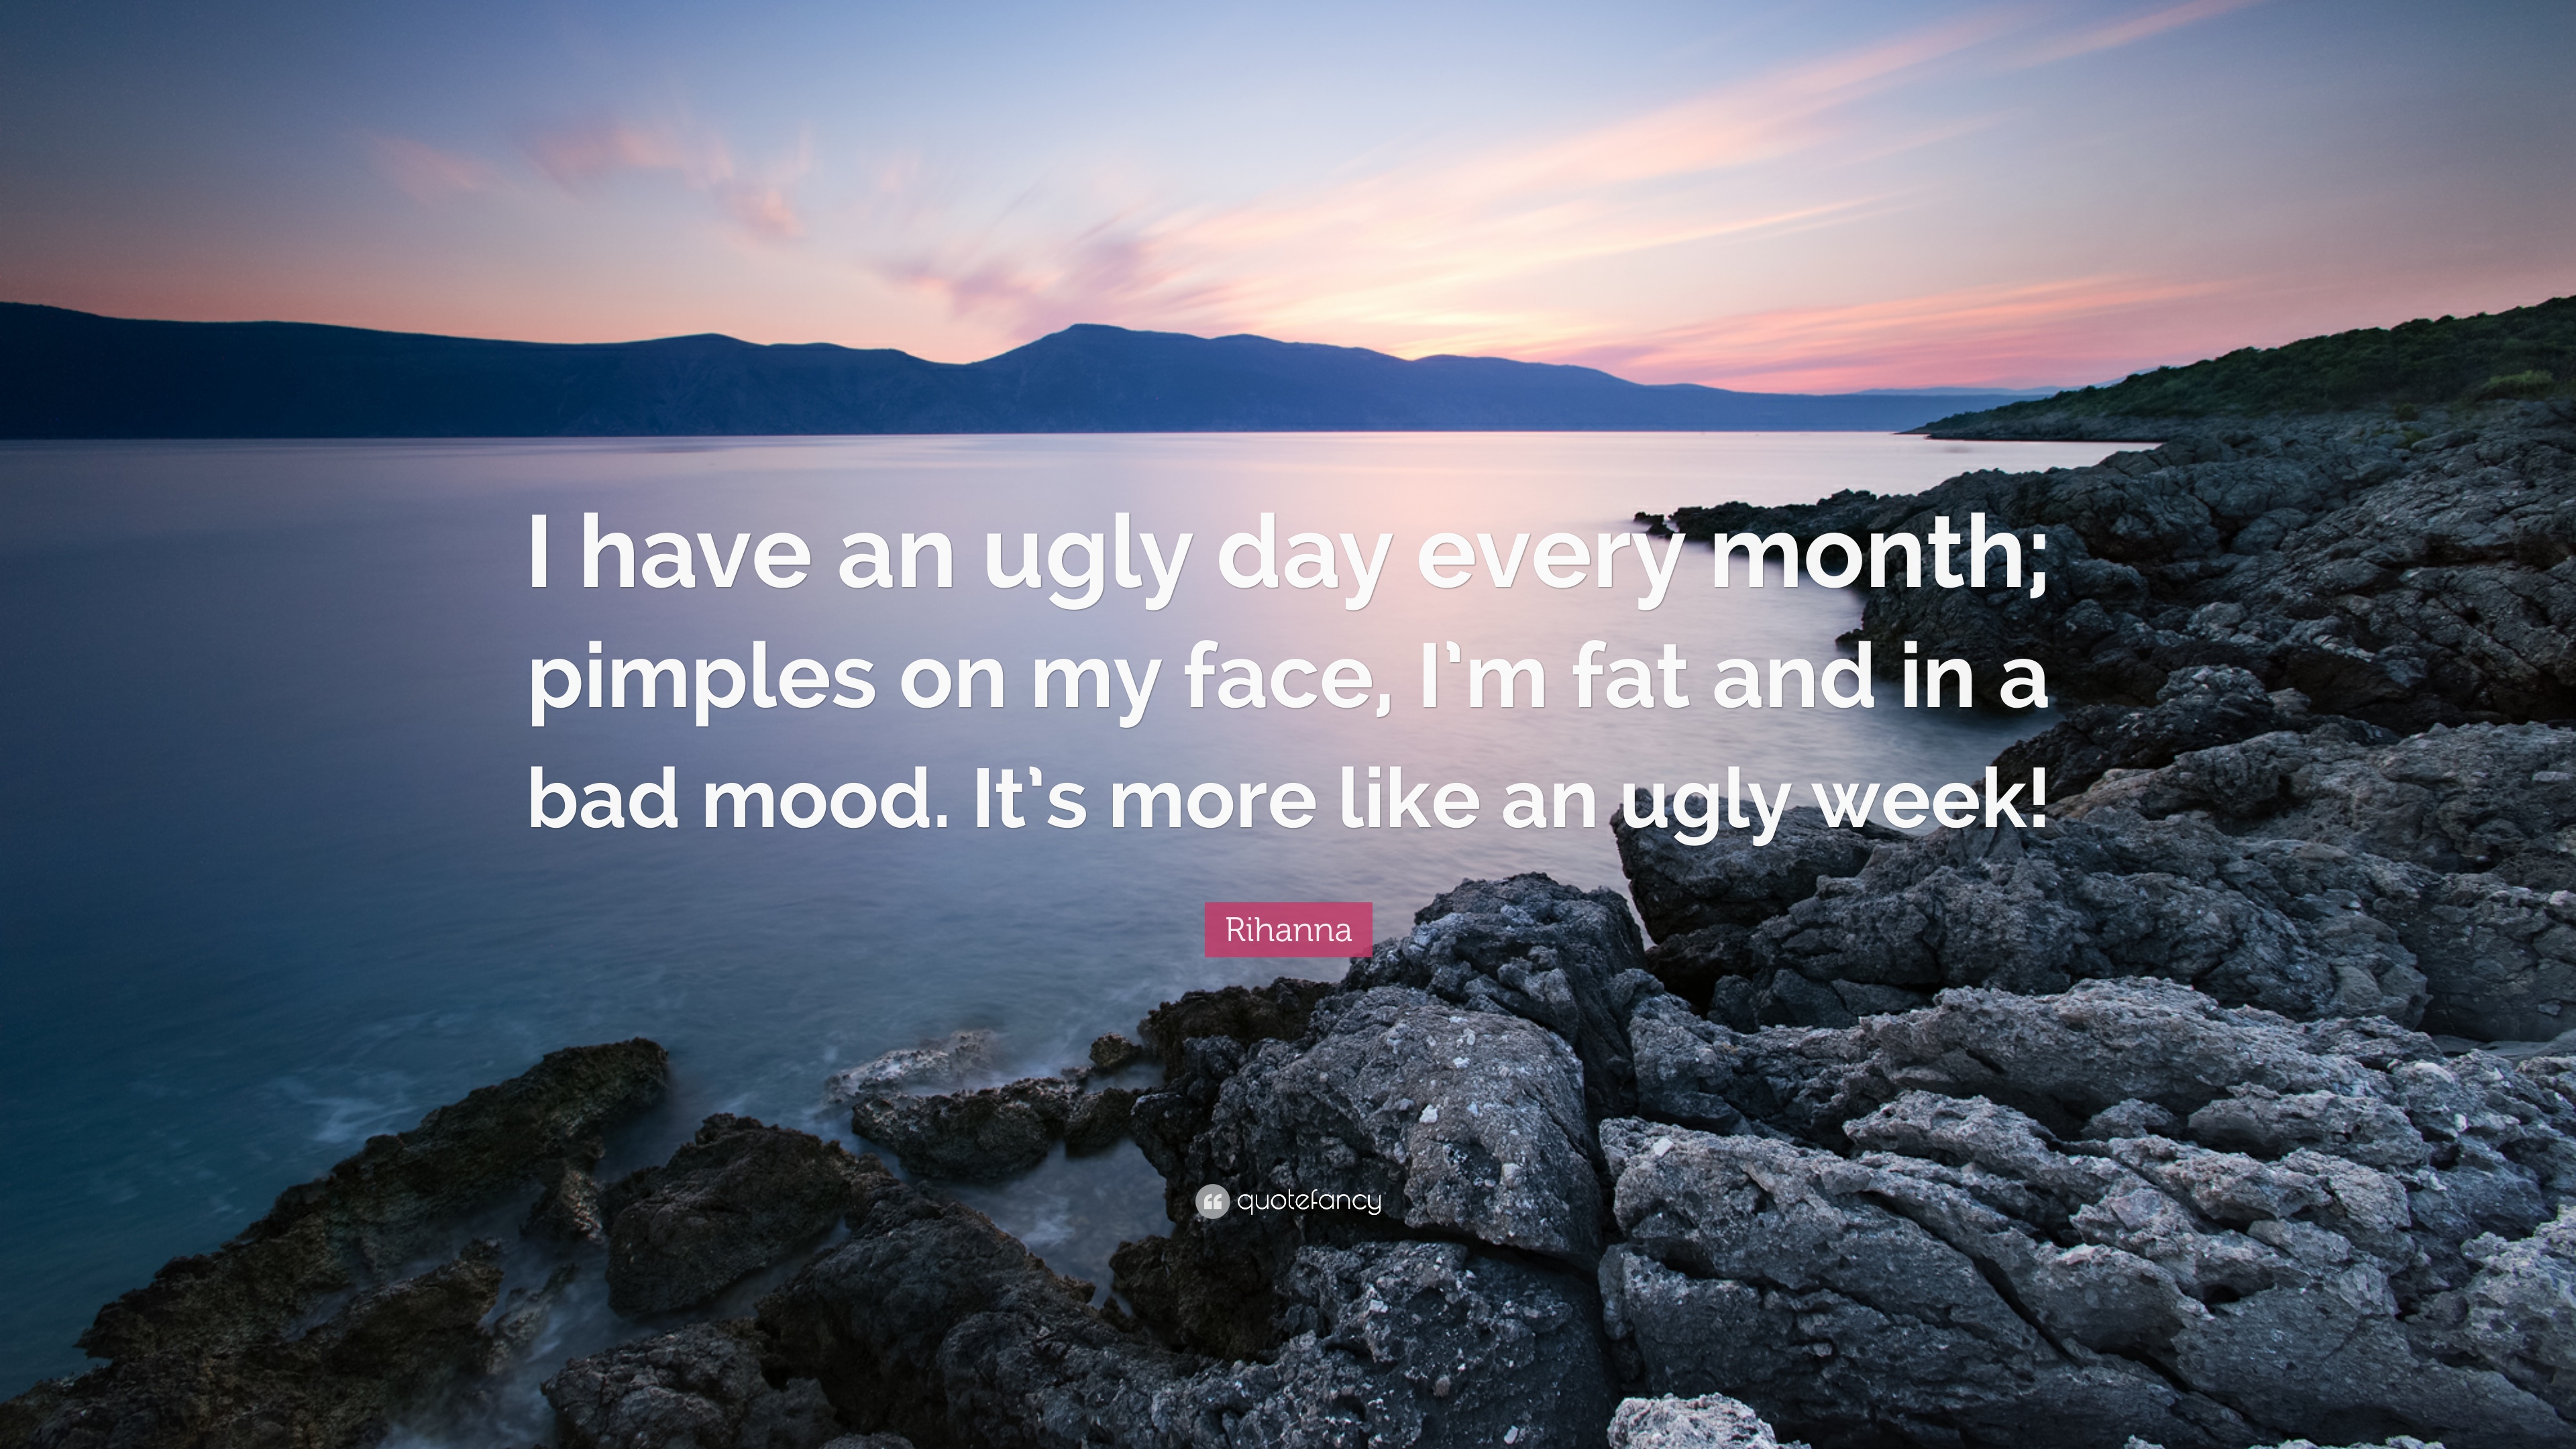 Rihanna Quote: “I have an ugly day every month; pimples